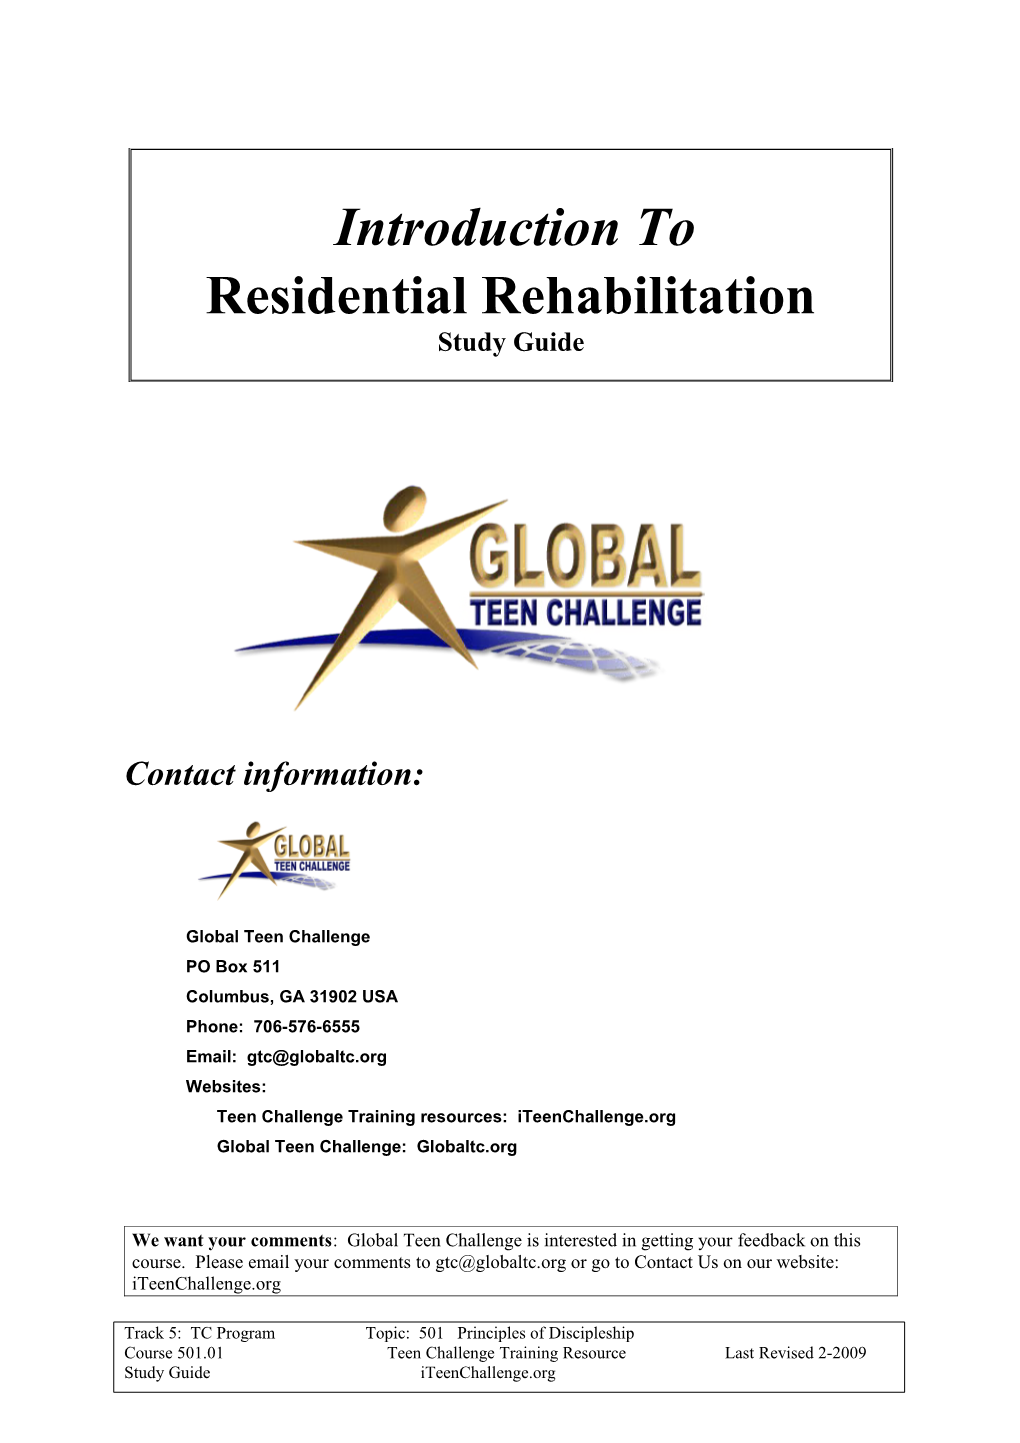 Introduction to Residential Rehabilitation